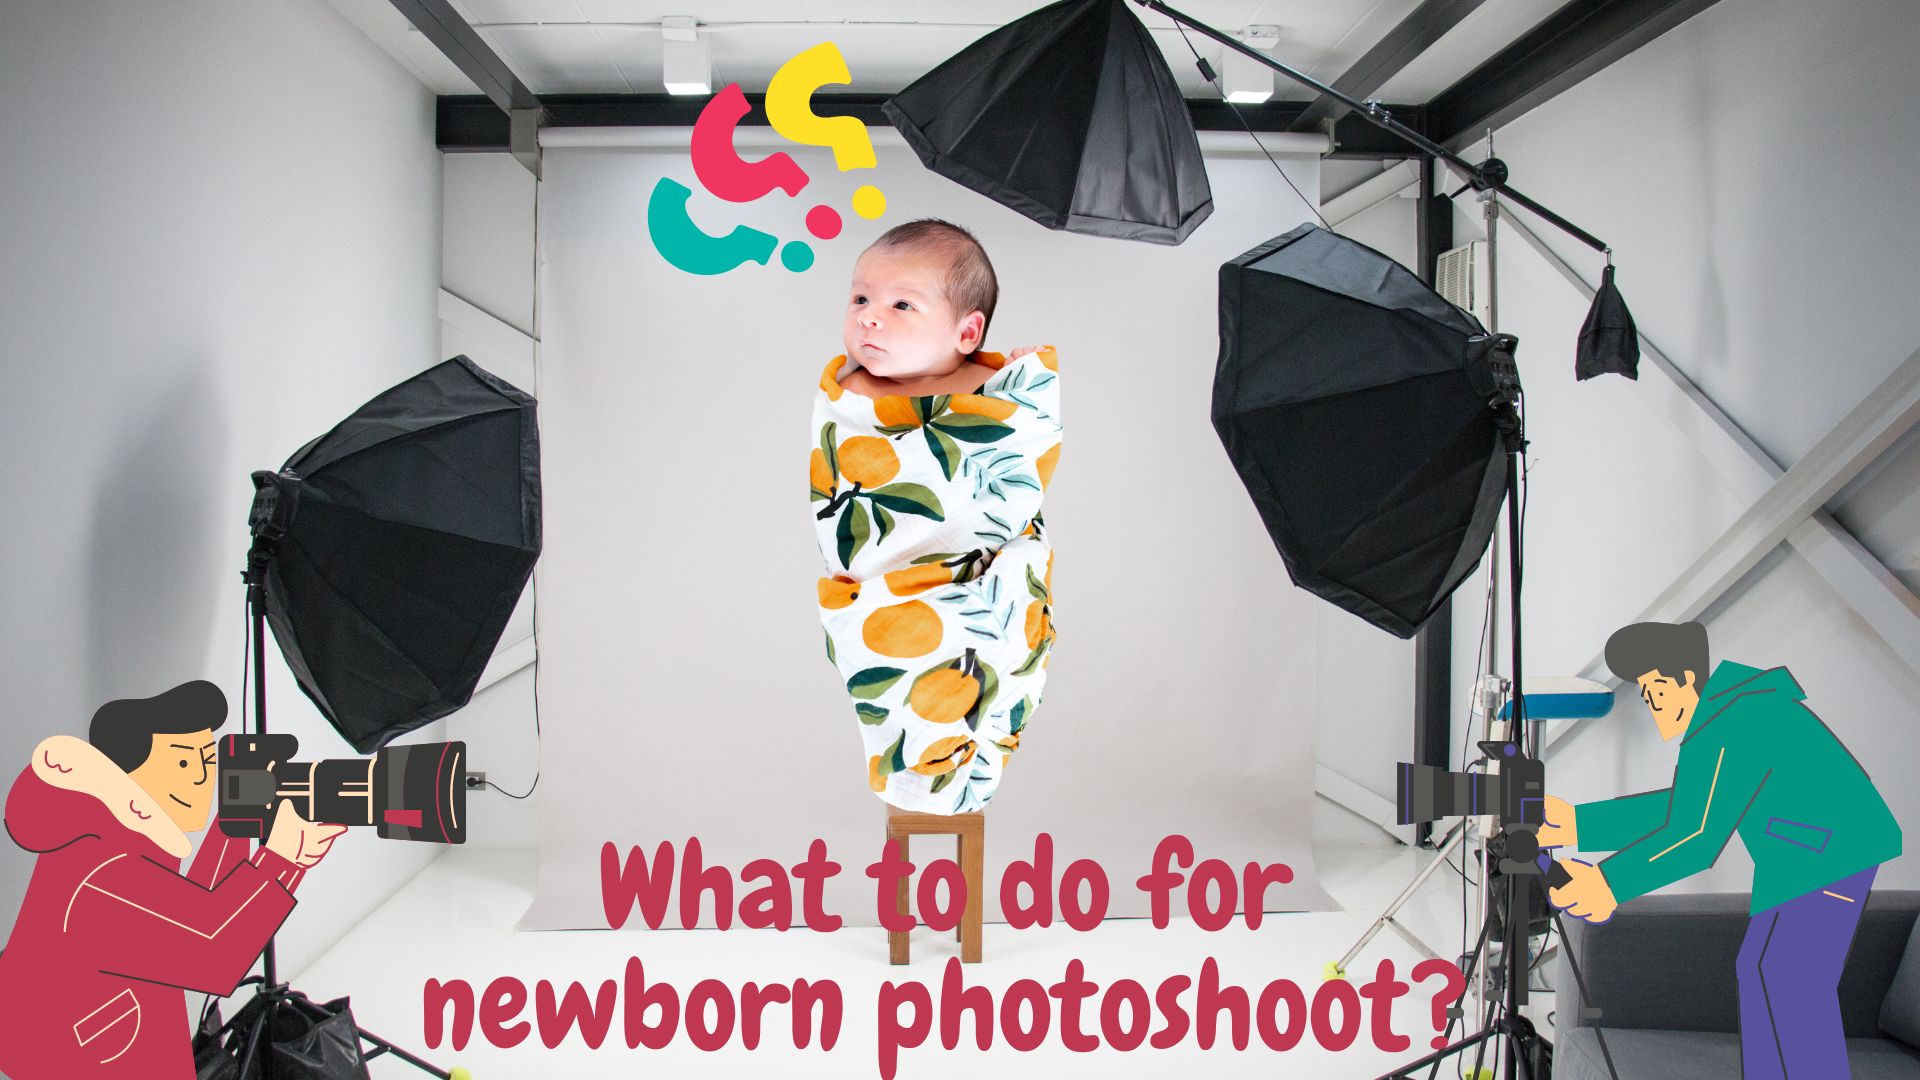 What to do for newborn photoshoot?